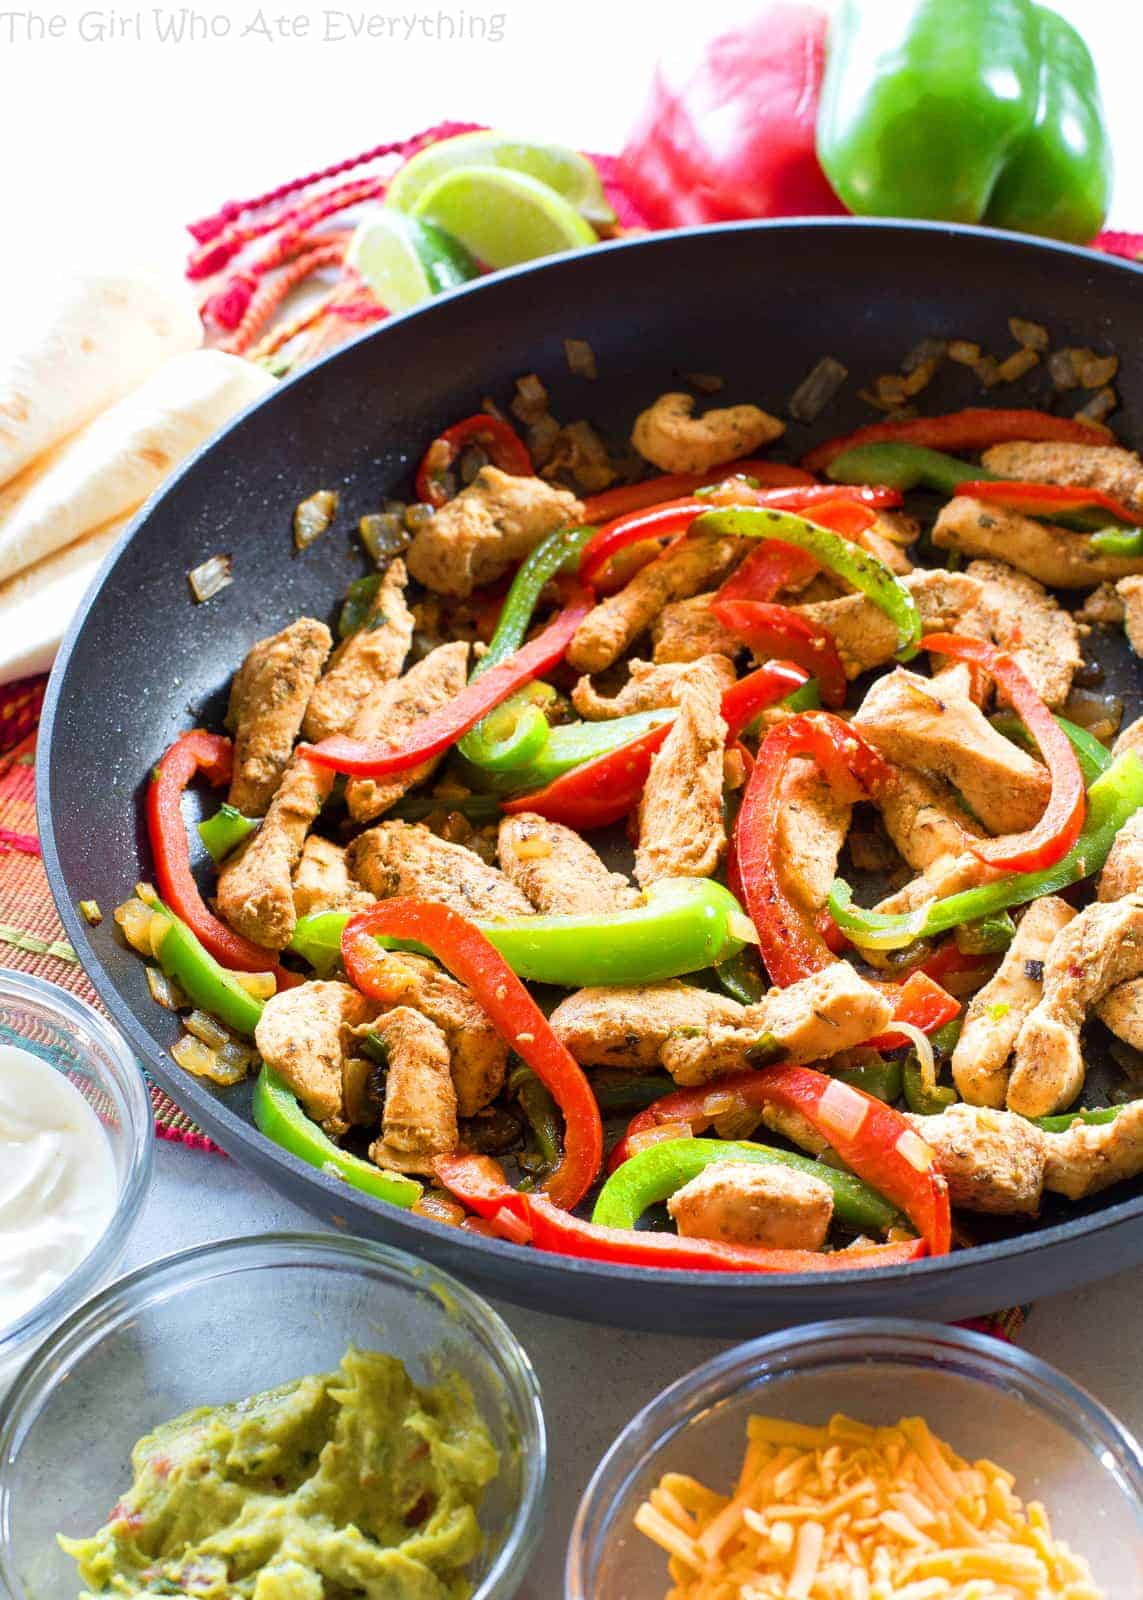 Classic Chicken Fajitas - The Girl Who Ate Everything